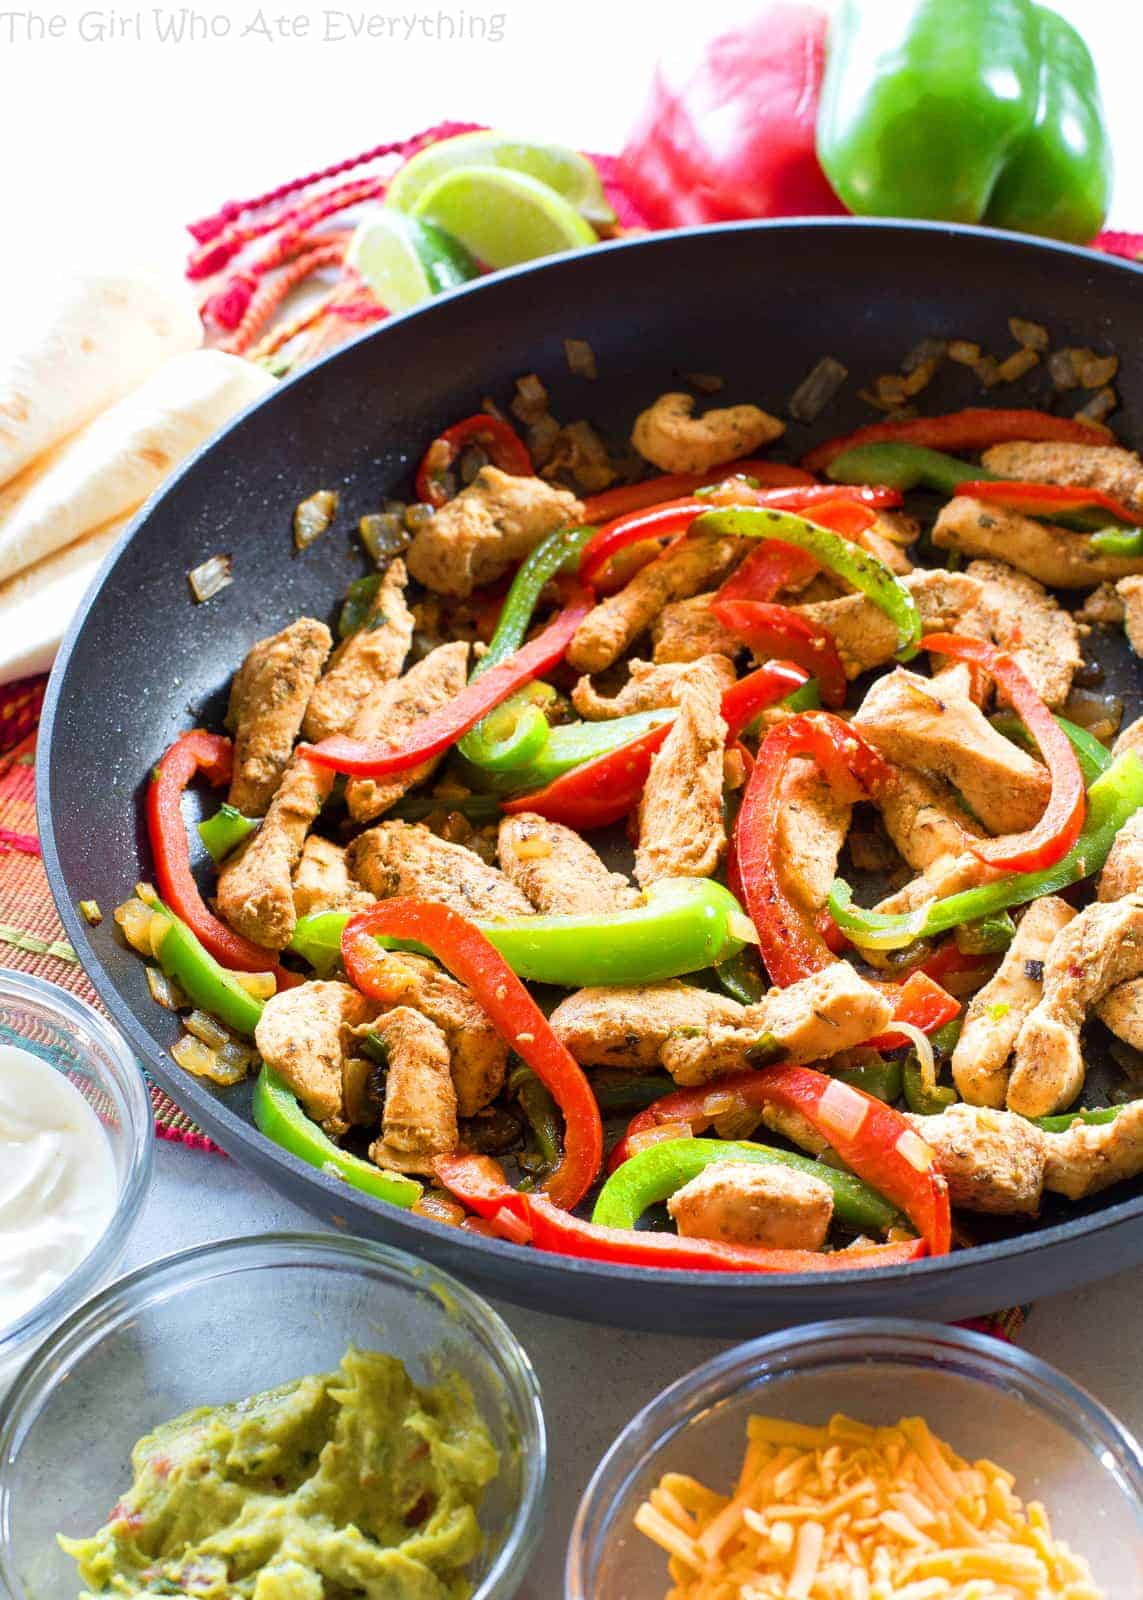 Classic Chicken Fajitas - The Girl Who Ate Everything